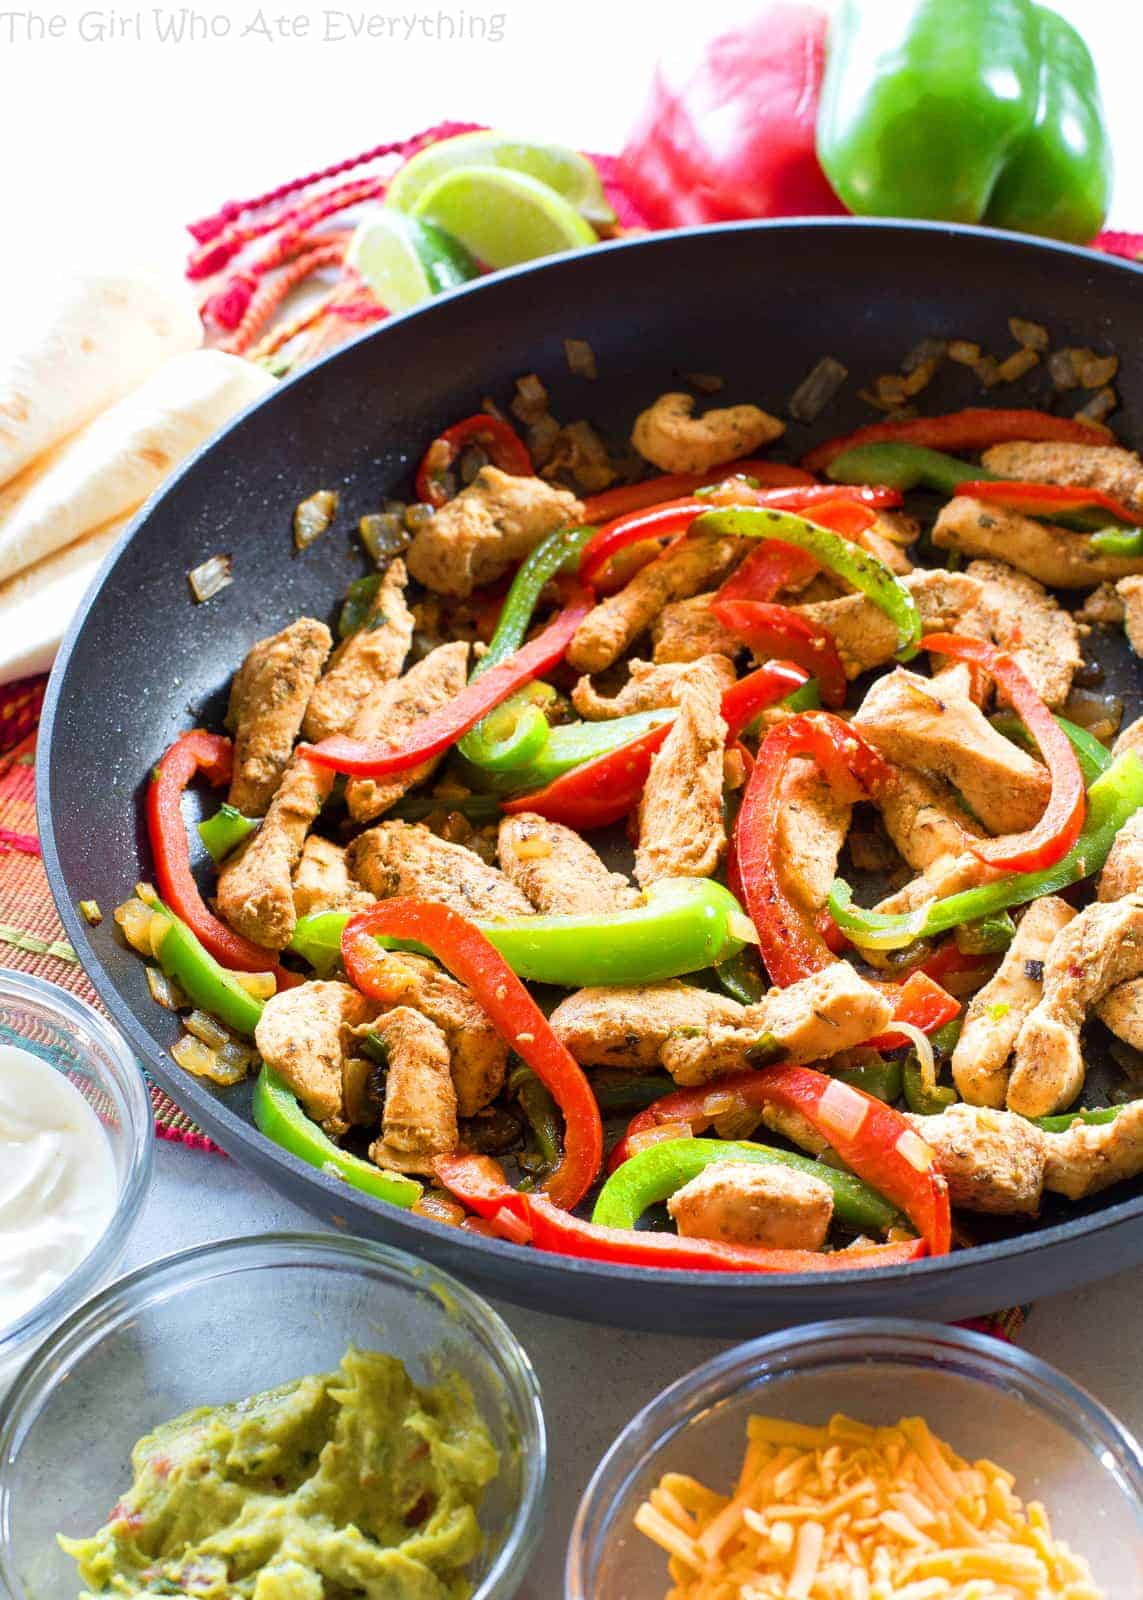 Classic Chicken Fajitas - The Girl Who Ate Everything